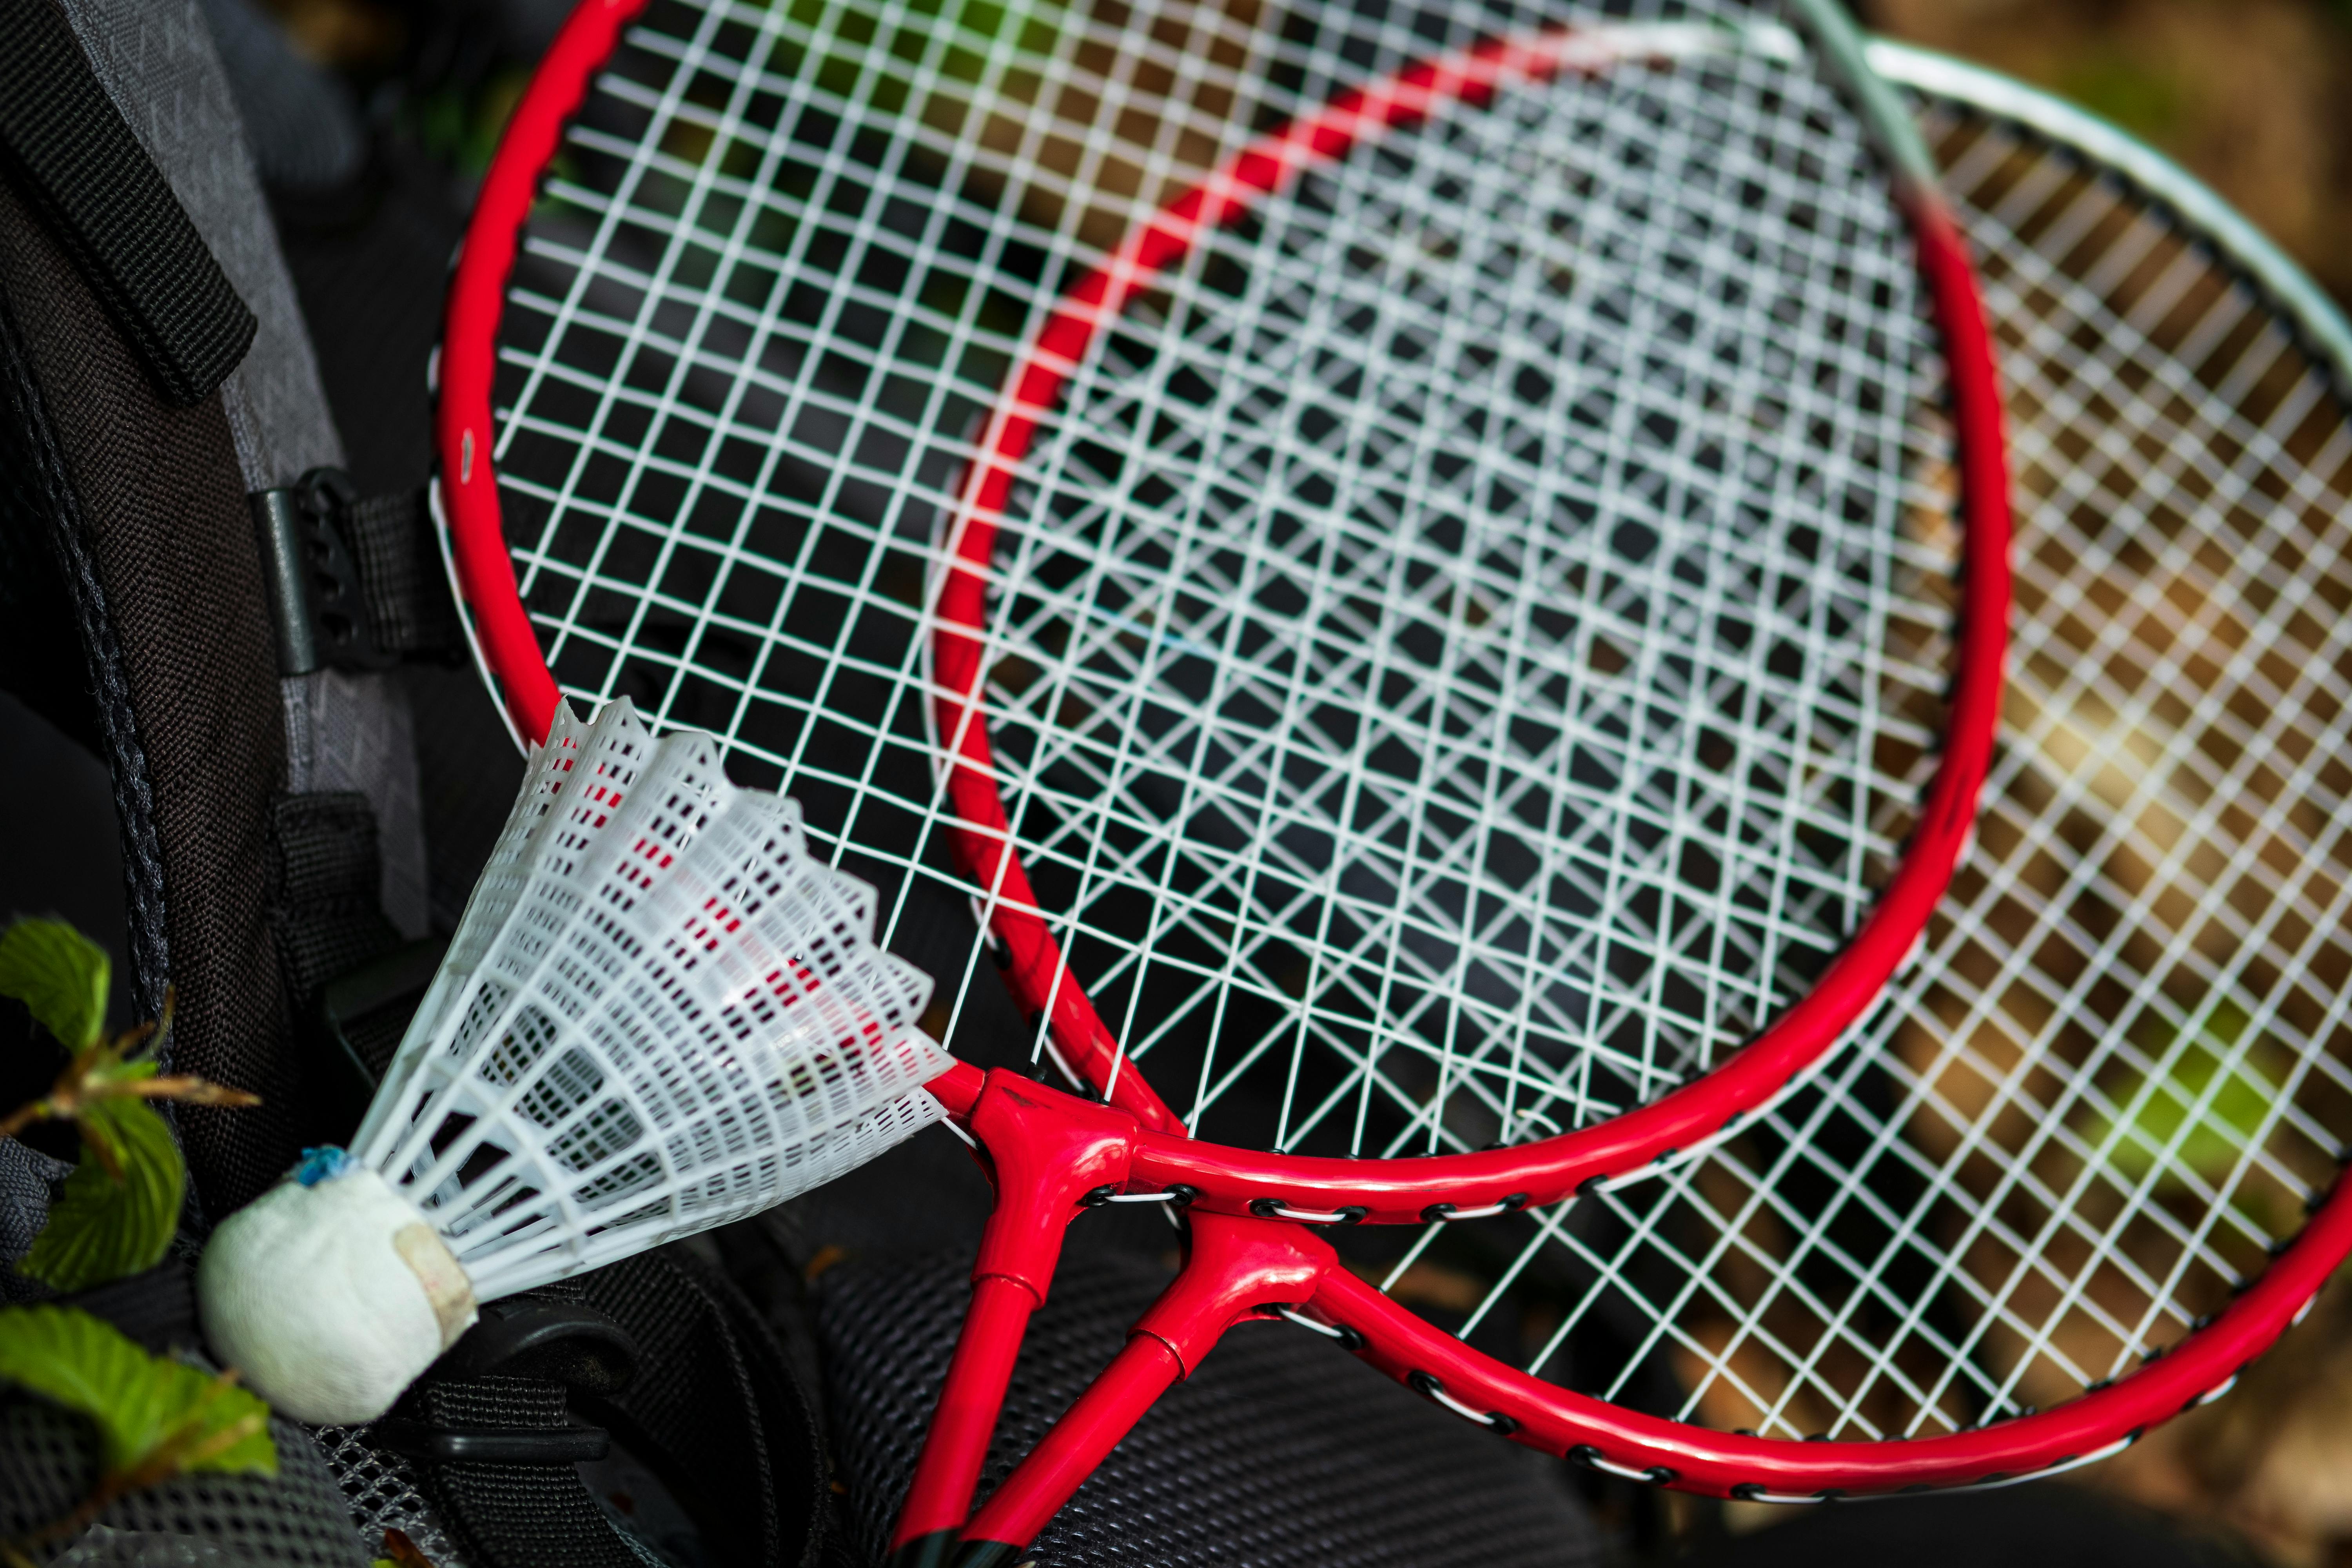 Difference between tennis and badminton rackets